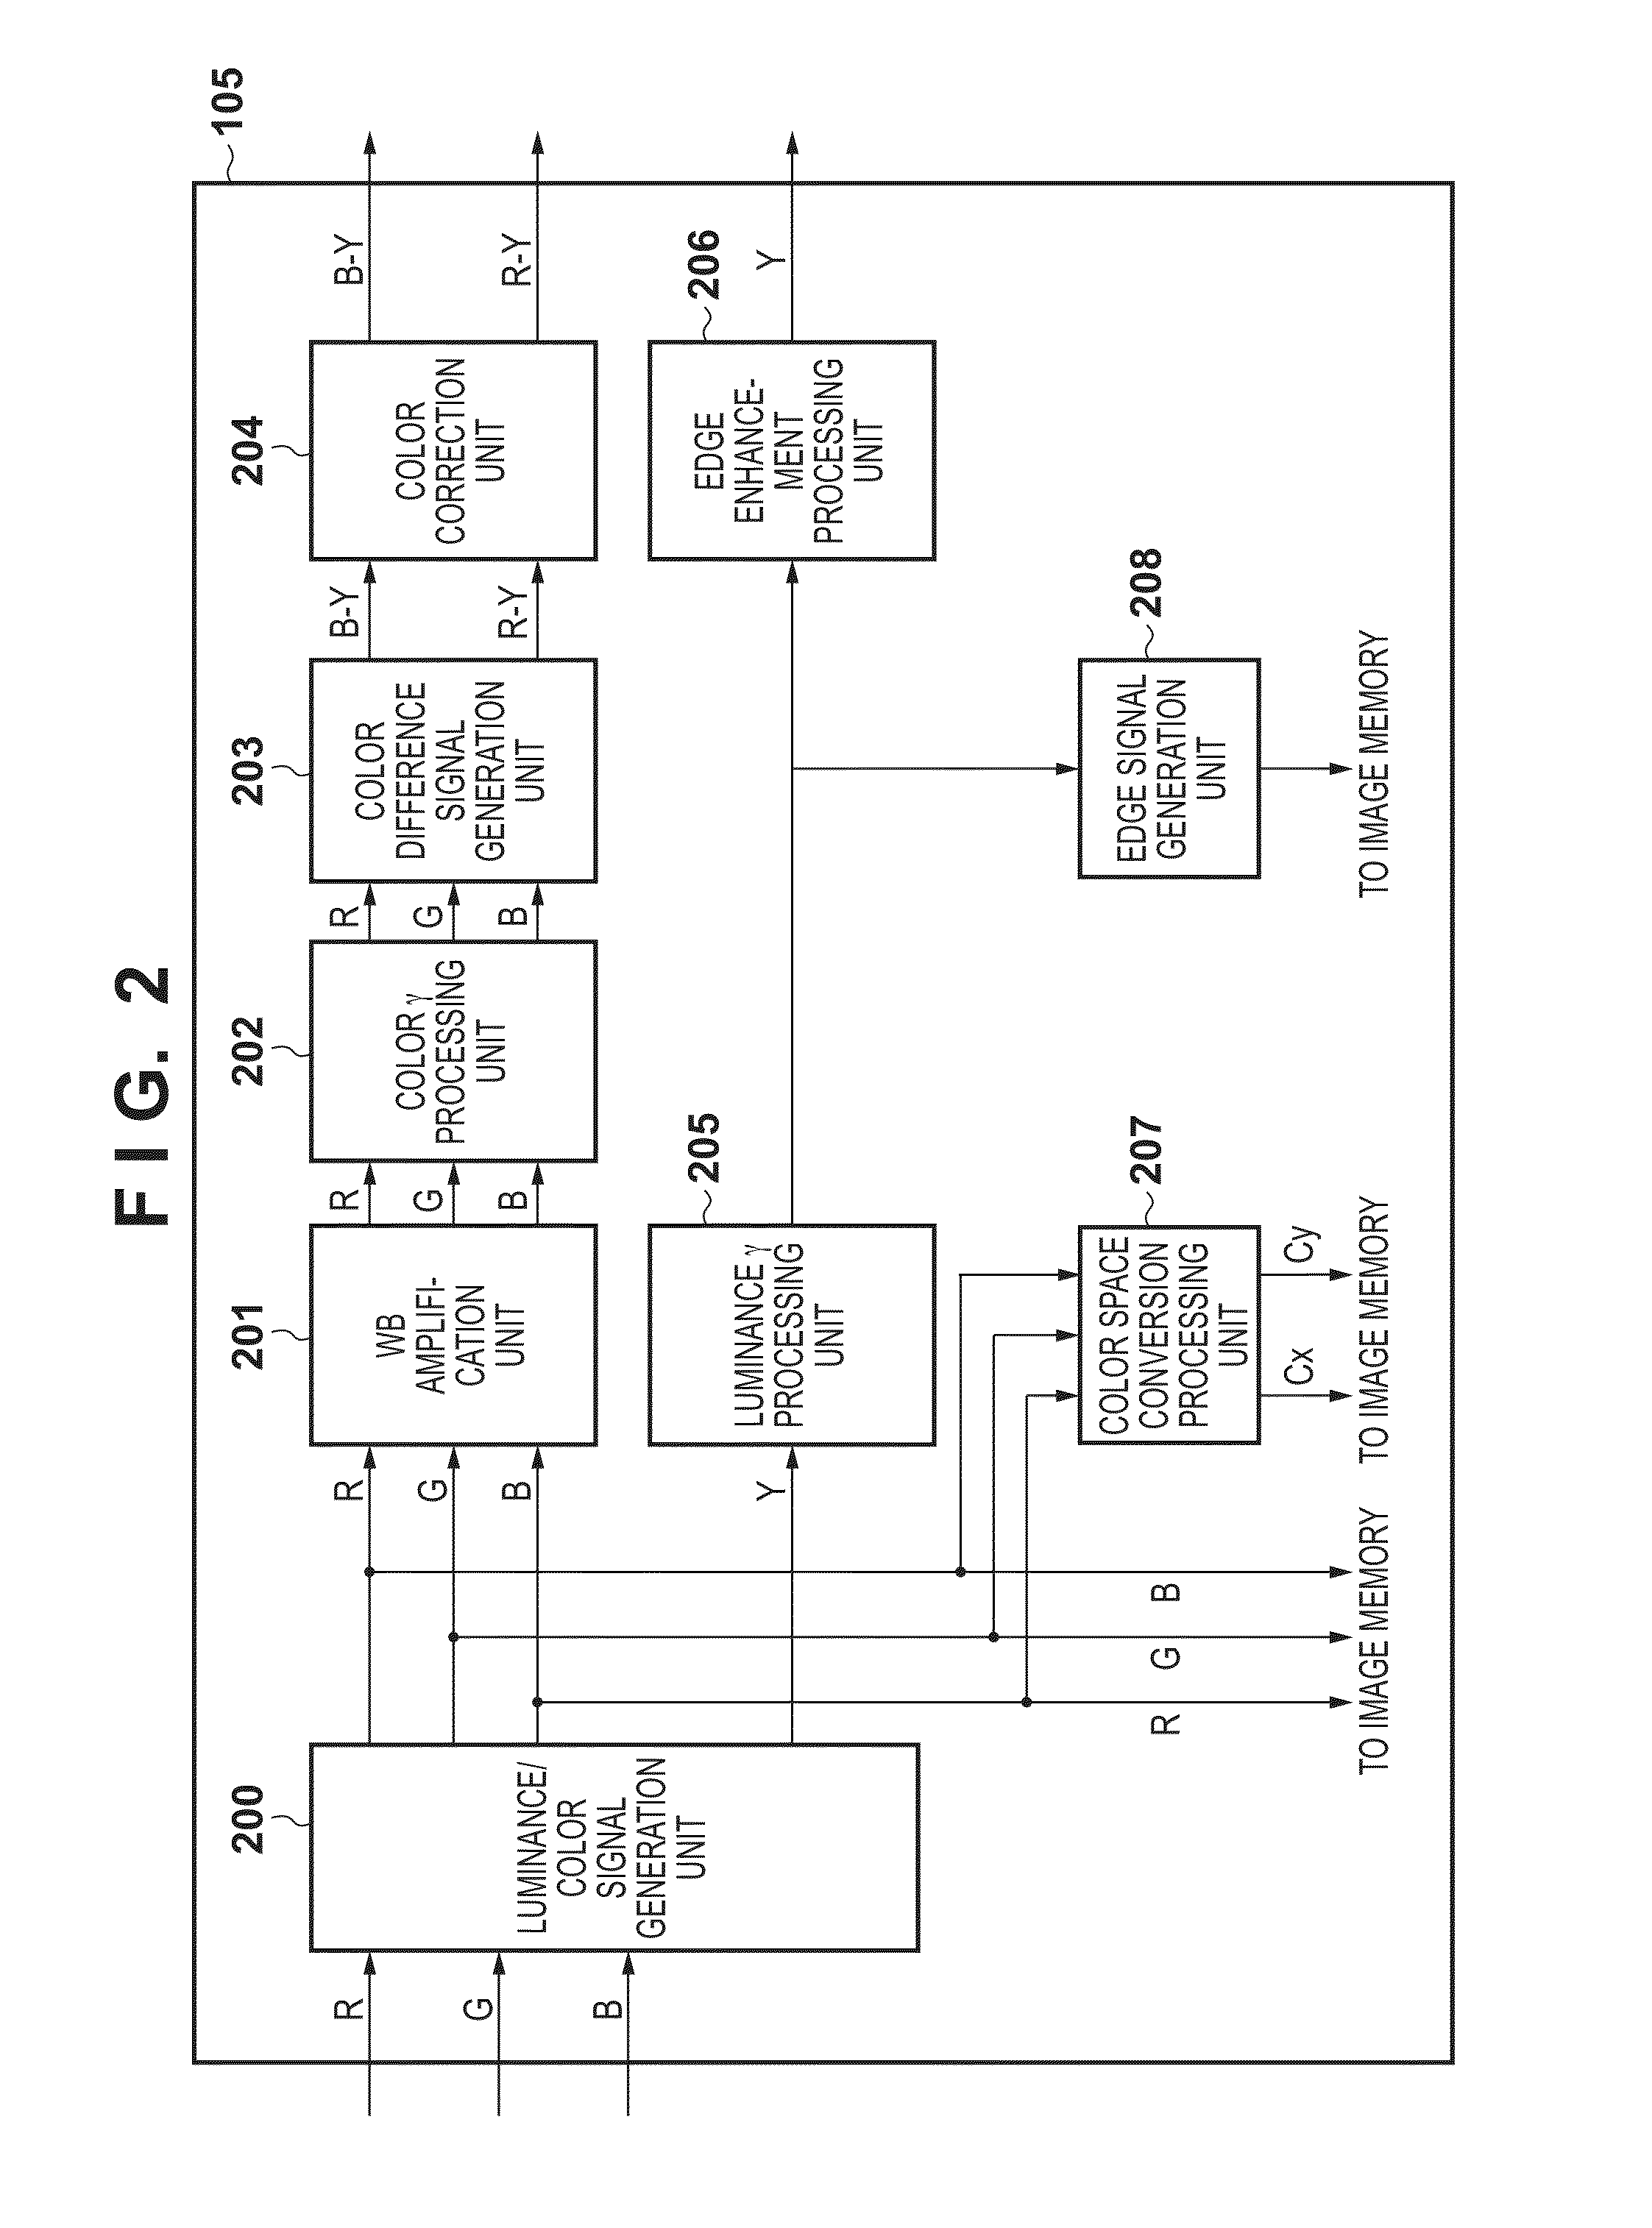 Image processing apparatus and control method therefor